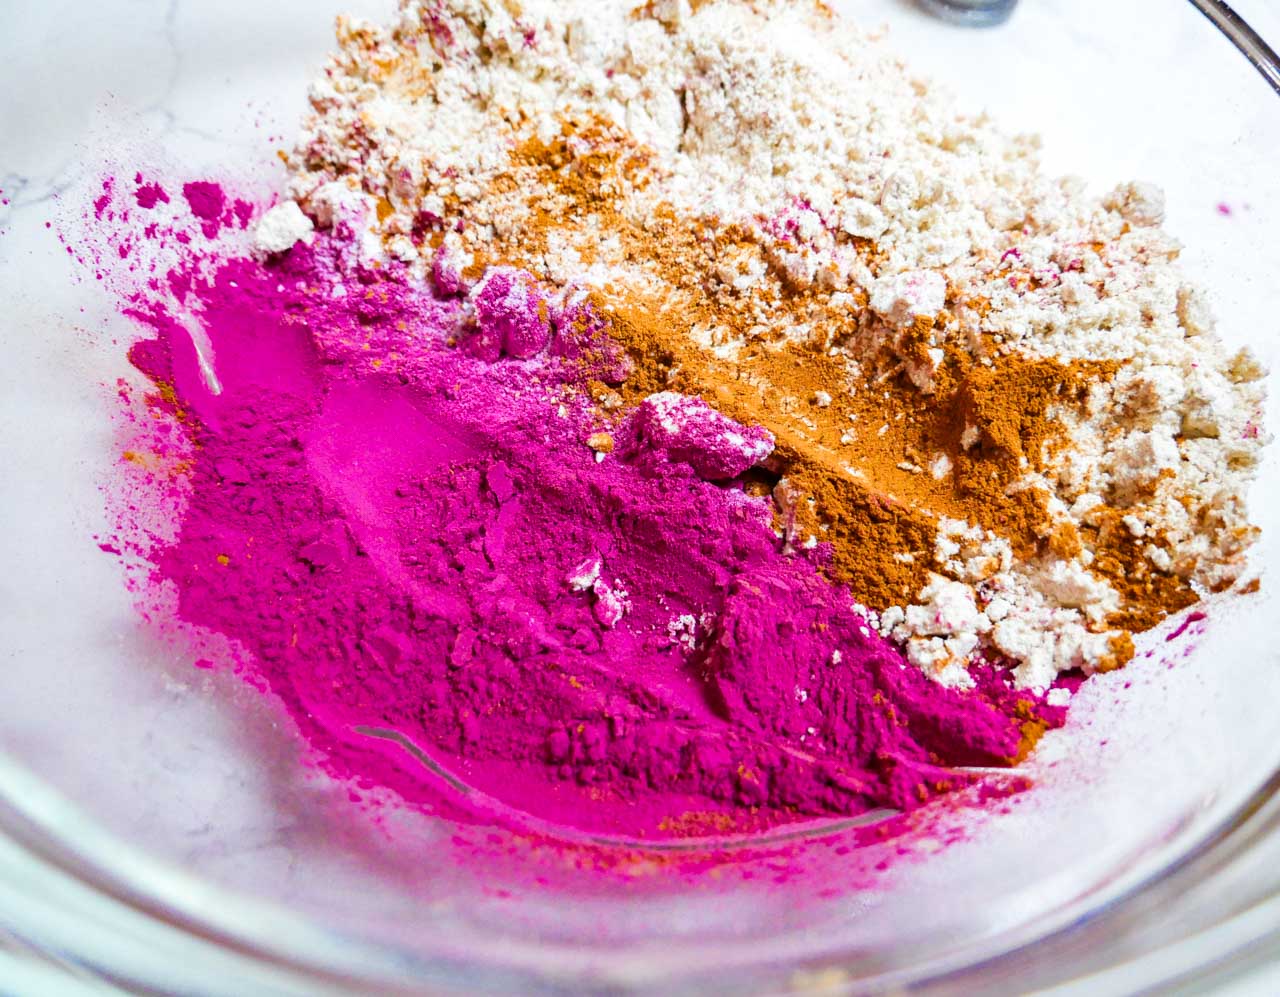 Dragon fruit powder with dry ingredients in a clear glass bowl on a white countertop